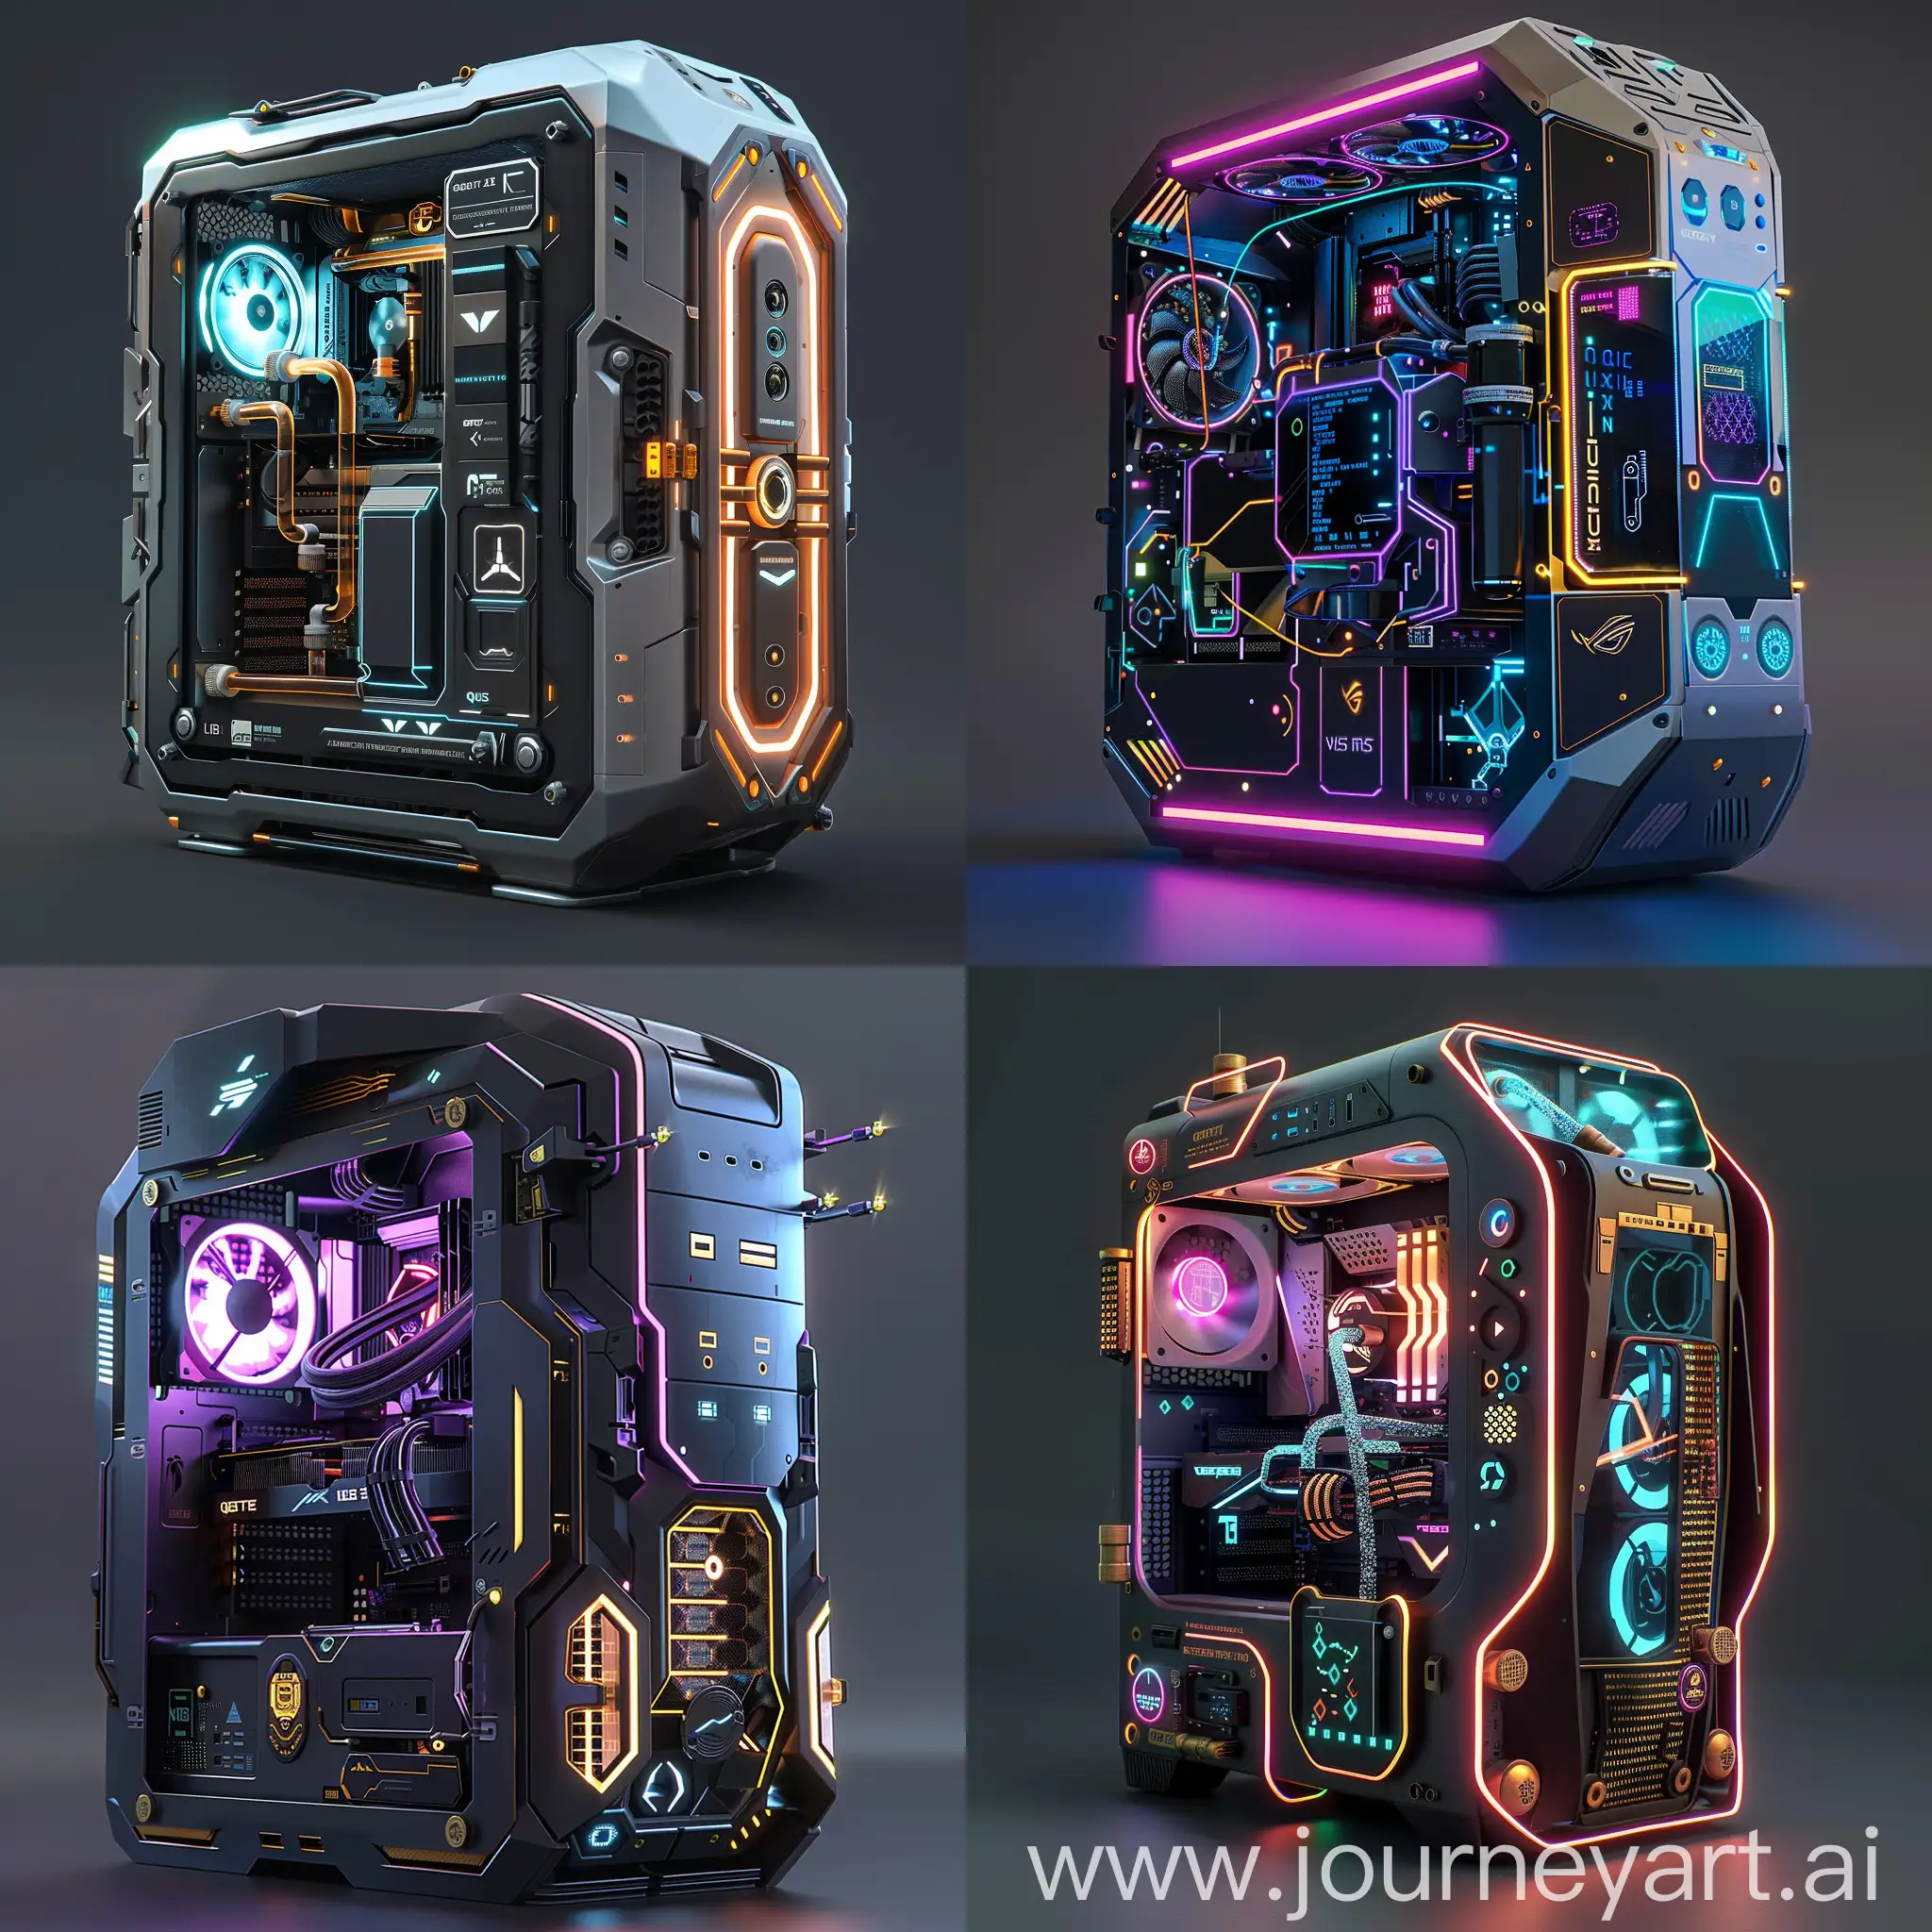 Futuristic PC case, postcyberpunk, biopunk, nanopunk, cyberprep, in futuristic style, Biometric Access Panel, Organic Cooling System, Nanofiber Cable Management, Augmented Reality Display, Quantum Processing Unit (QPU), Bioluminescent Component Accents, Nanobot Maintenance Swarm, Neural Interface Ports, Holographic Projection Array, Bio-Integrated Power Source, Bio-Engineered Chassis Materials, Nanotech-infused Surface Finishes, Embedded LED Light Strips, Modular Component Panels, Holographic Branding Displays, Biometric Identification Markers, Dynamic Airflow Ventilation System, Augmented Reality Interaction Points, Bioluminescent Accents, Integrated Drone Docking Station, unreal engine 5 --stylize 1000